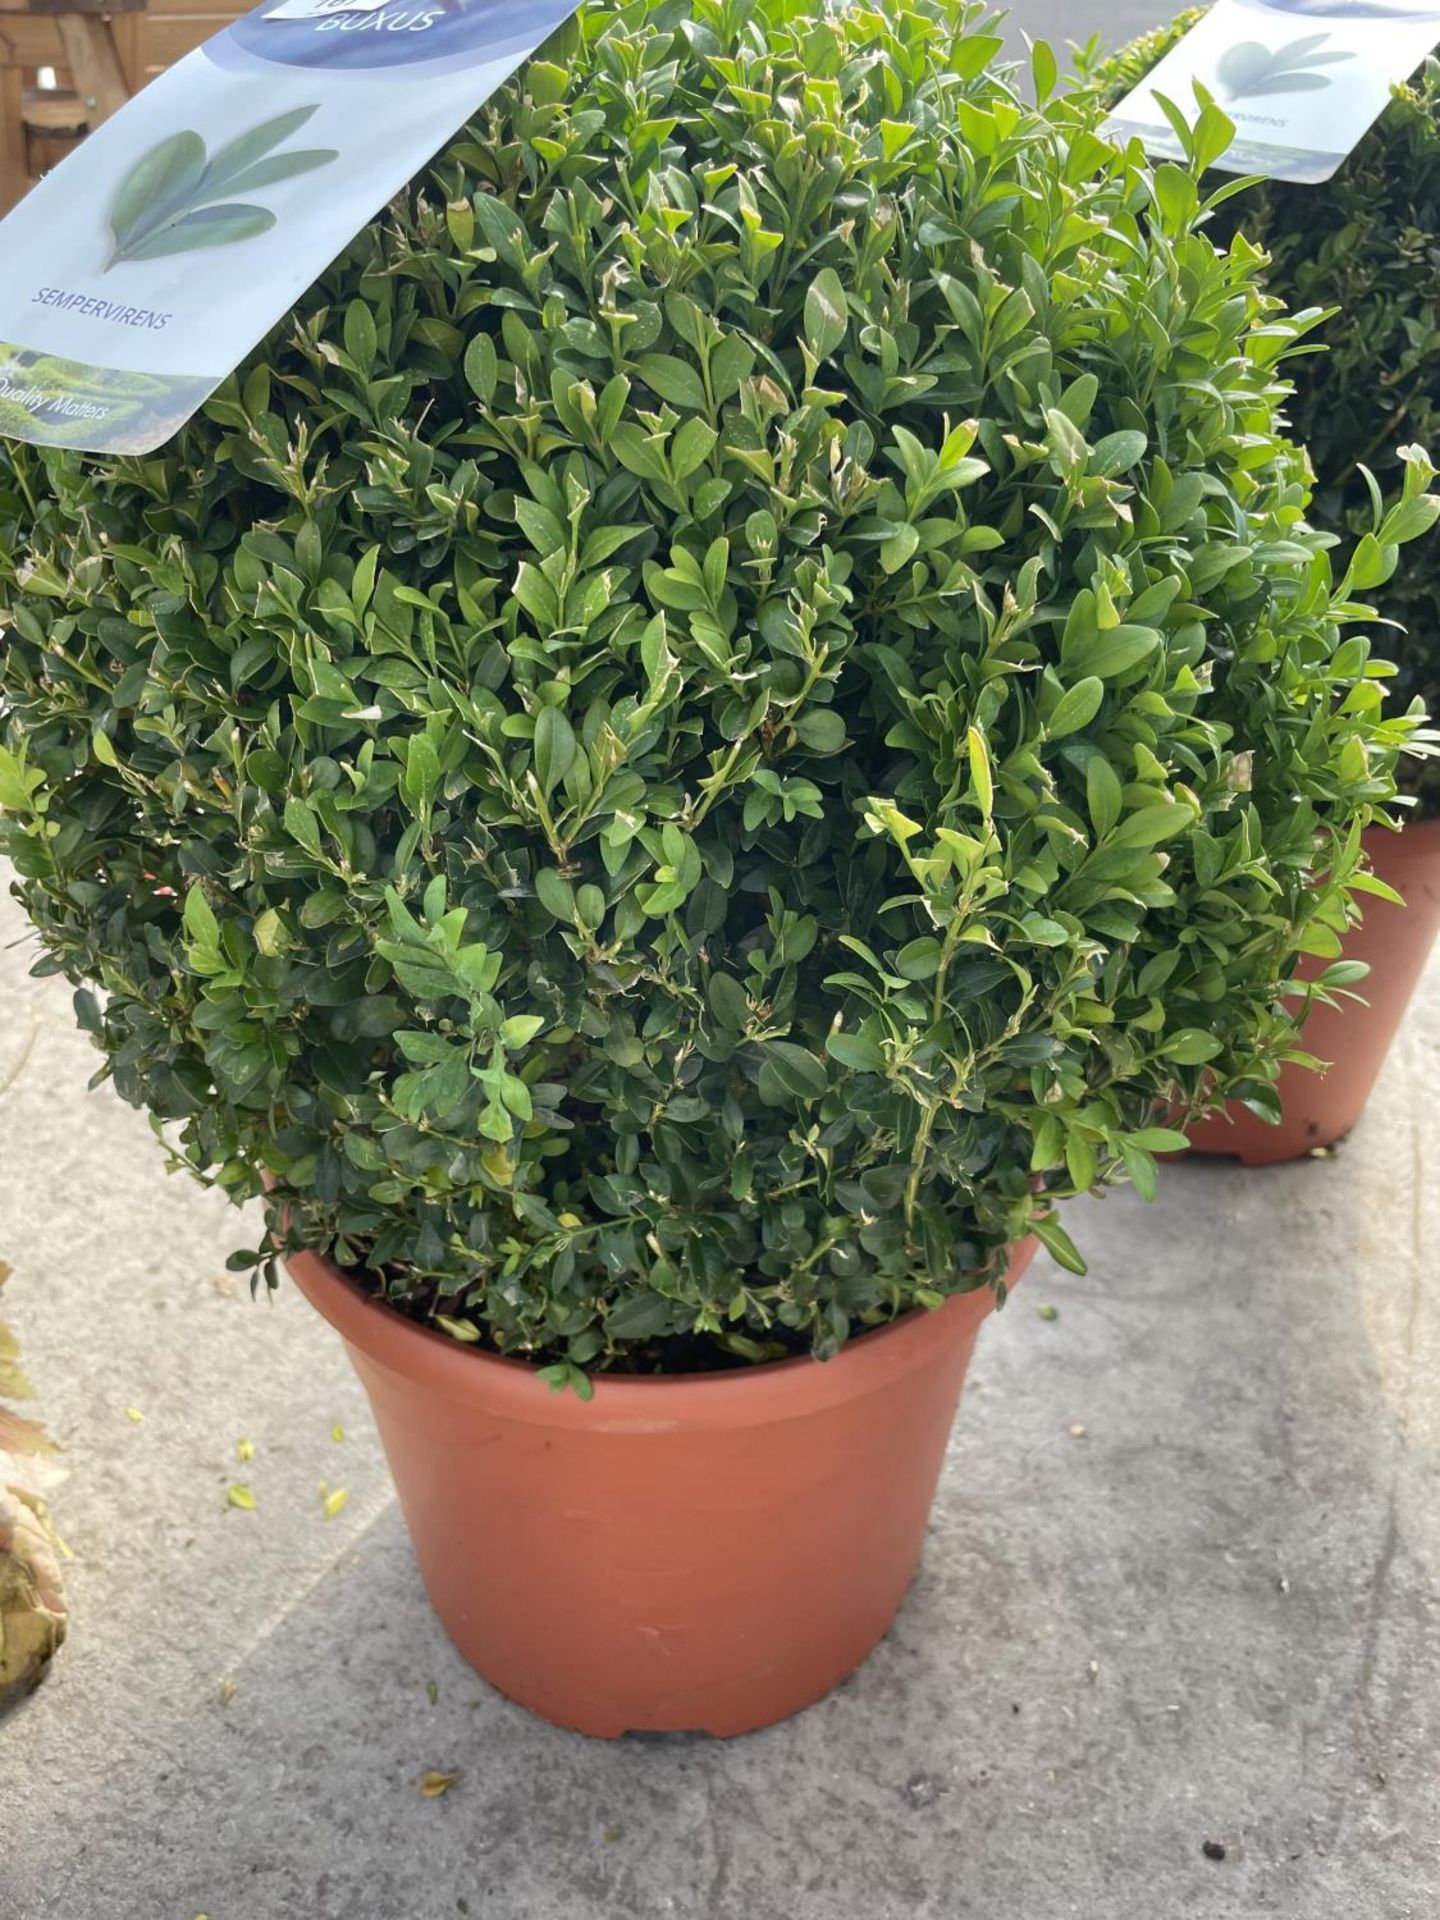 TWO BOX (BUXUS SEMPERVIRENS) BALLS 40+ IN 12 LTR POTS - Image 2 of 2